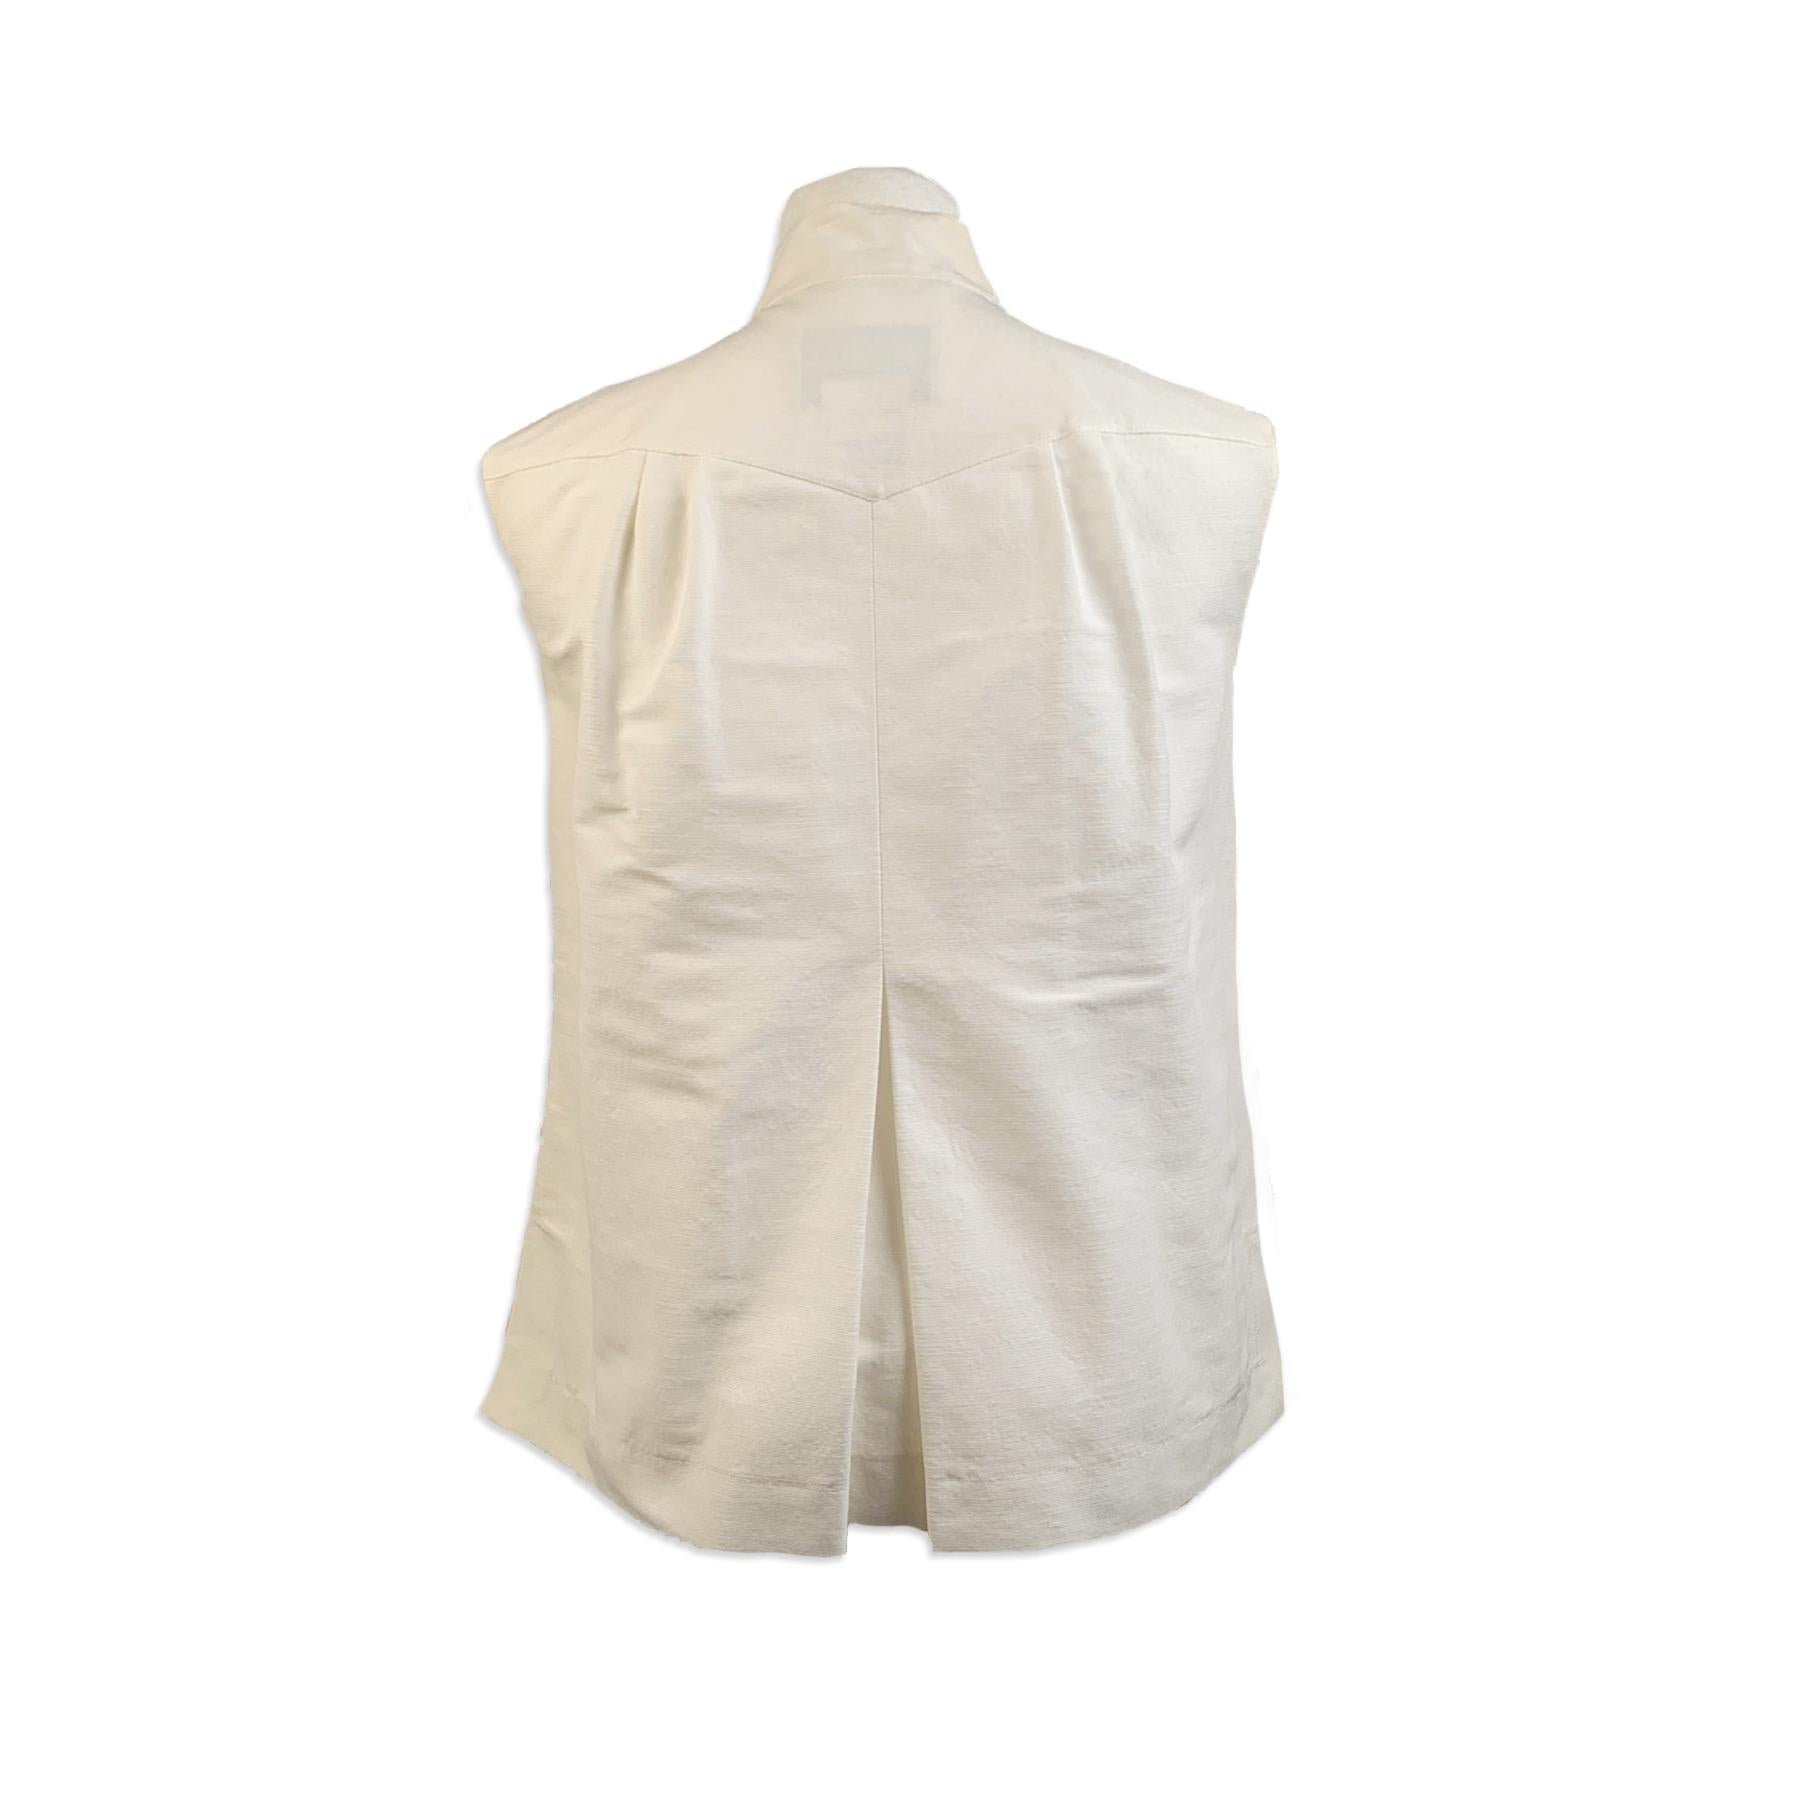 Chanel white grosgrain vest/sleeveless top. The vest features sleeveless styling, a button closure on the front, bow detail on the neckline and pleating detailing. 2 flap pockets on the chest. Unlined. Composition: 62 % Cotton, 26% Nylon, 9 %